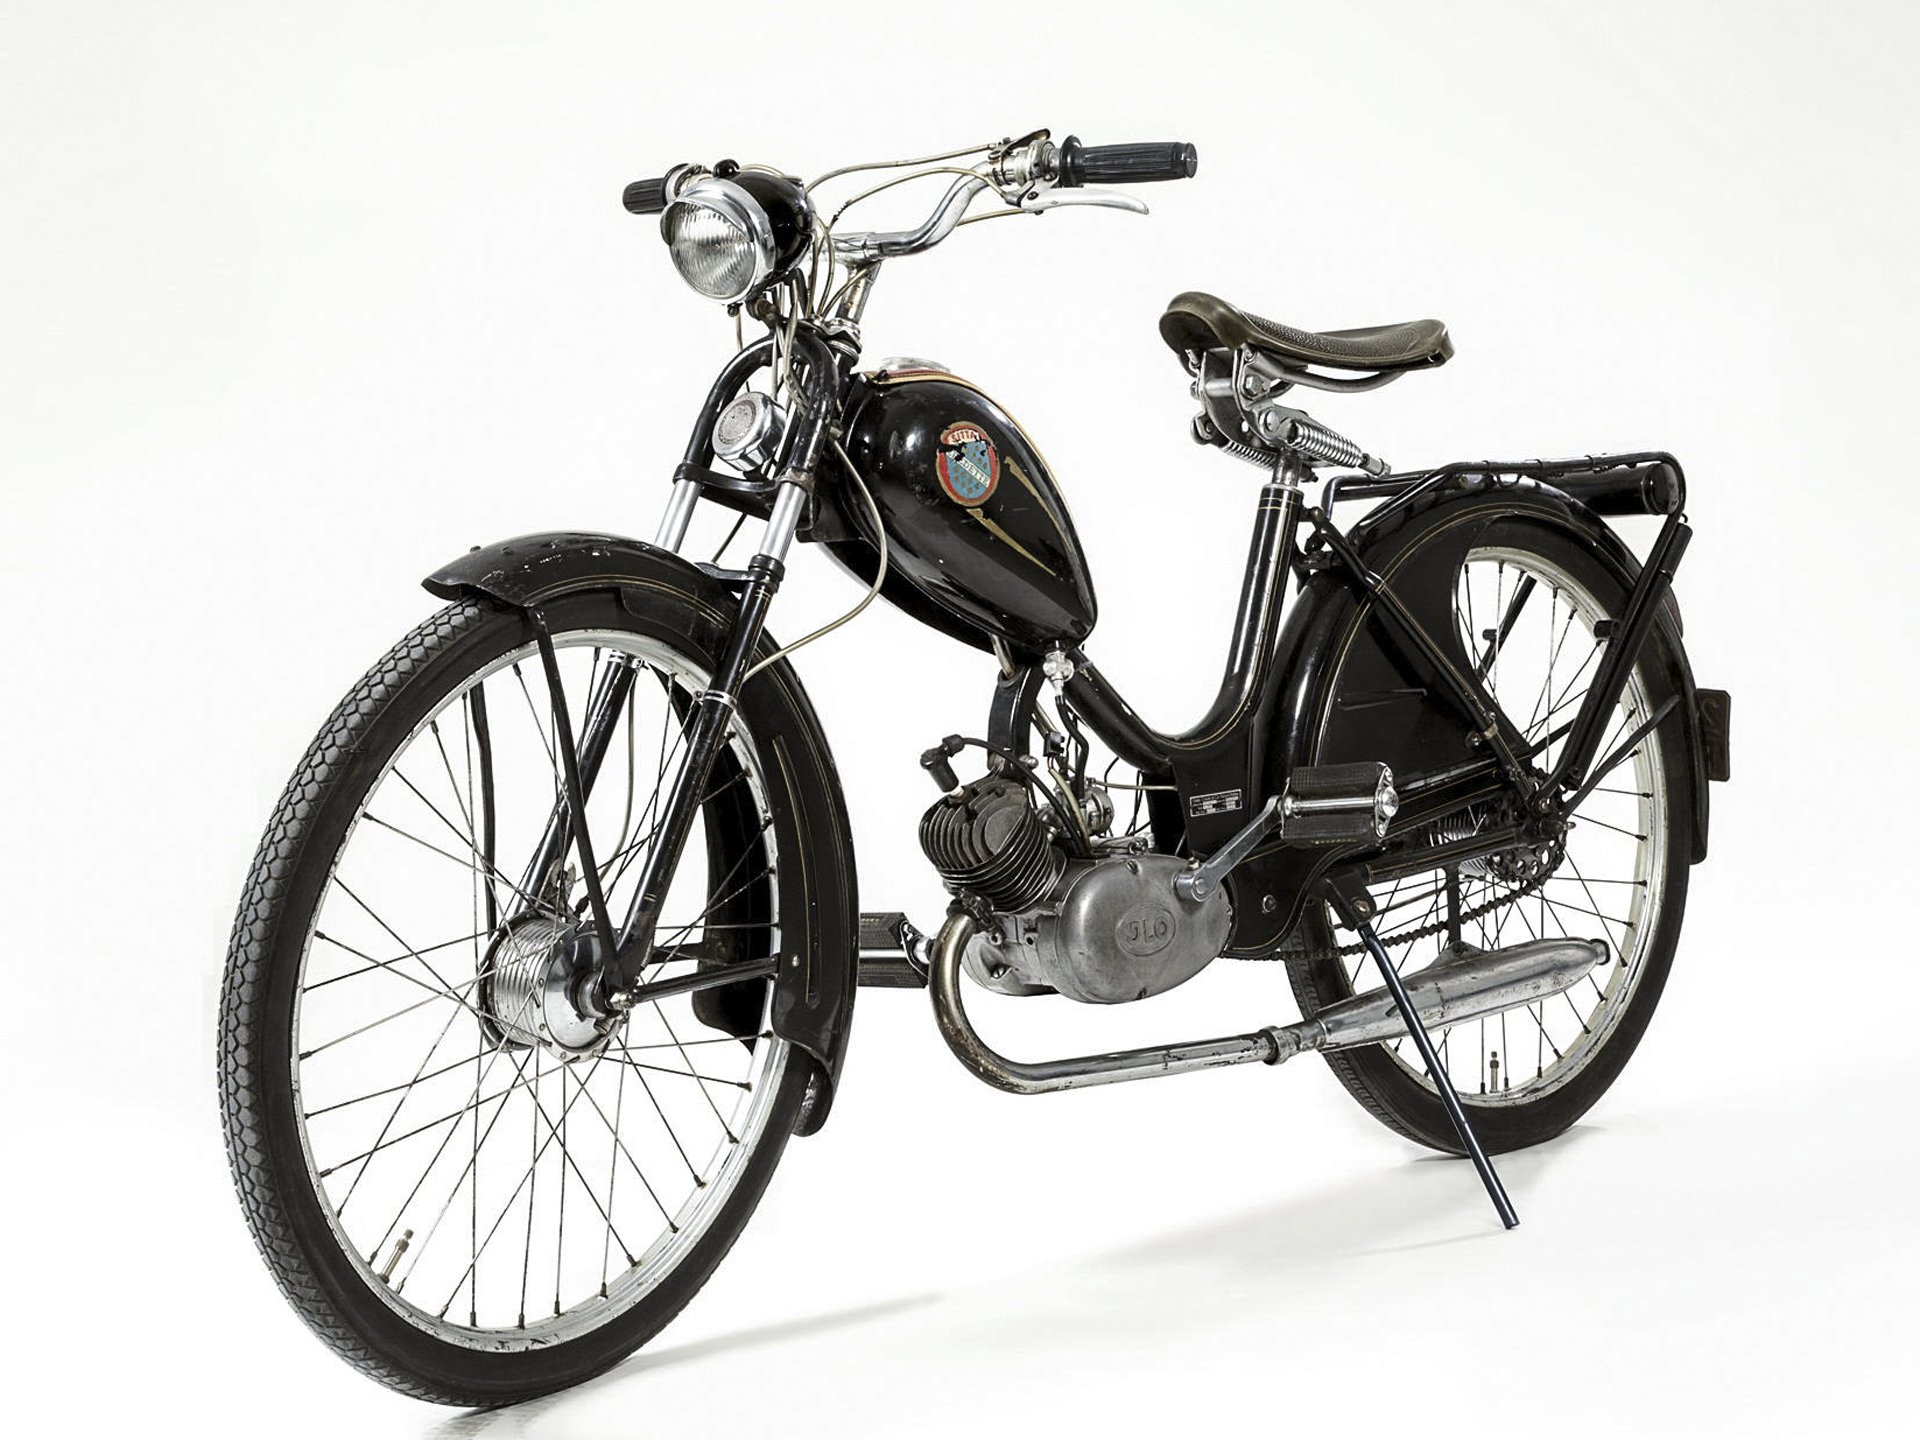 Moped "Sitta Credette II" (Stadtmuseum Kassel CC BY-NC-SA)